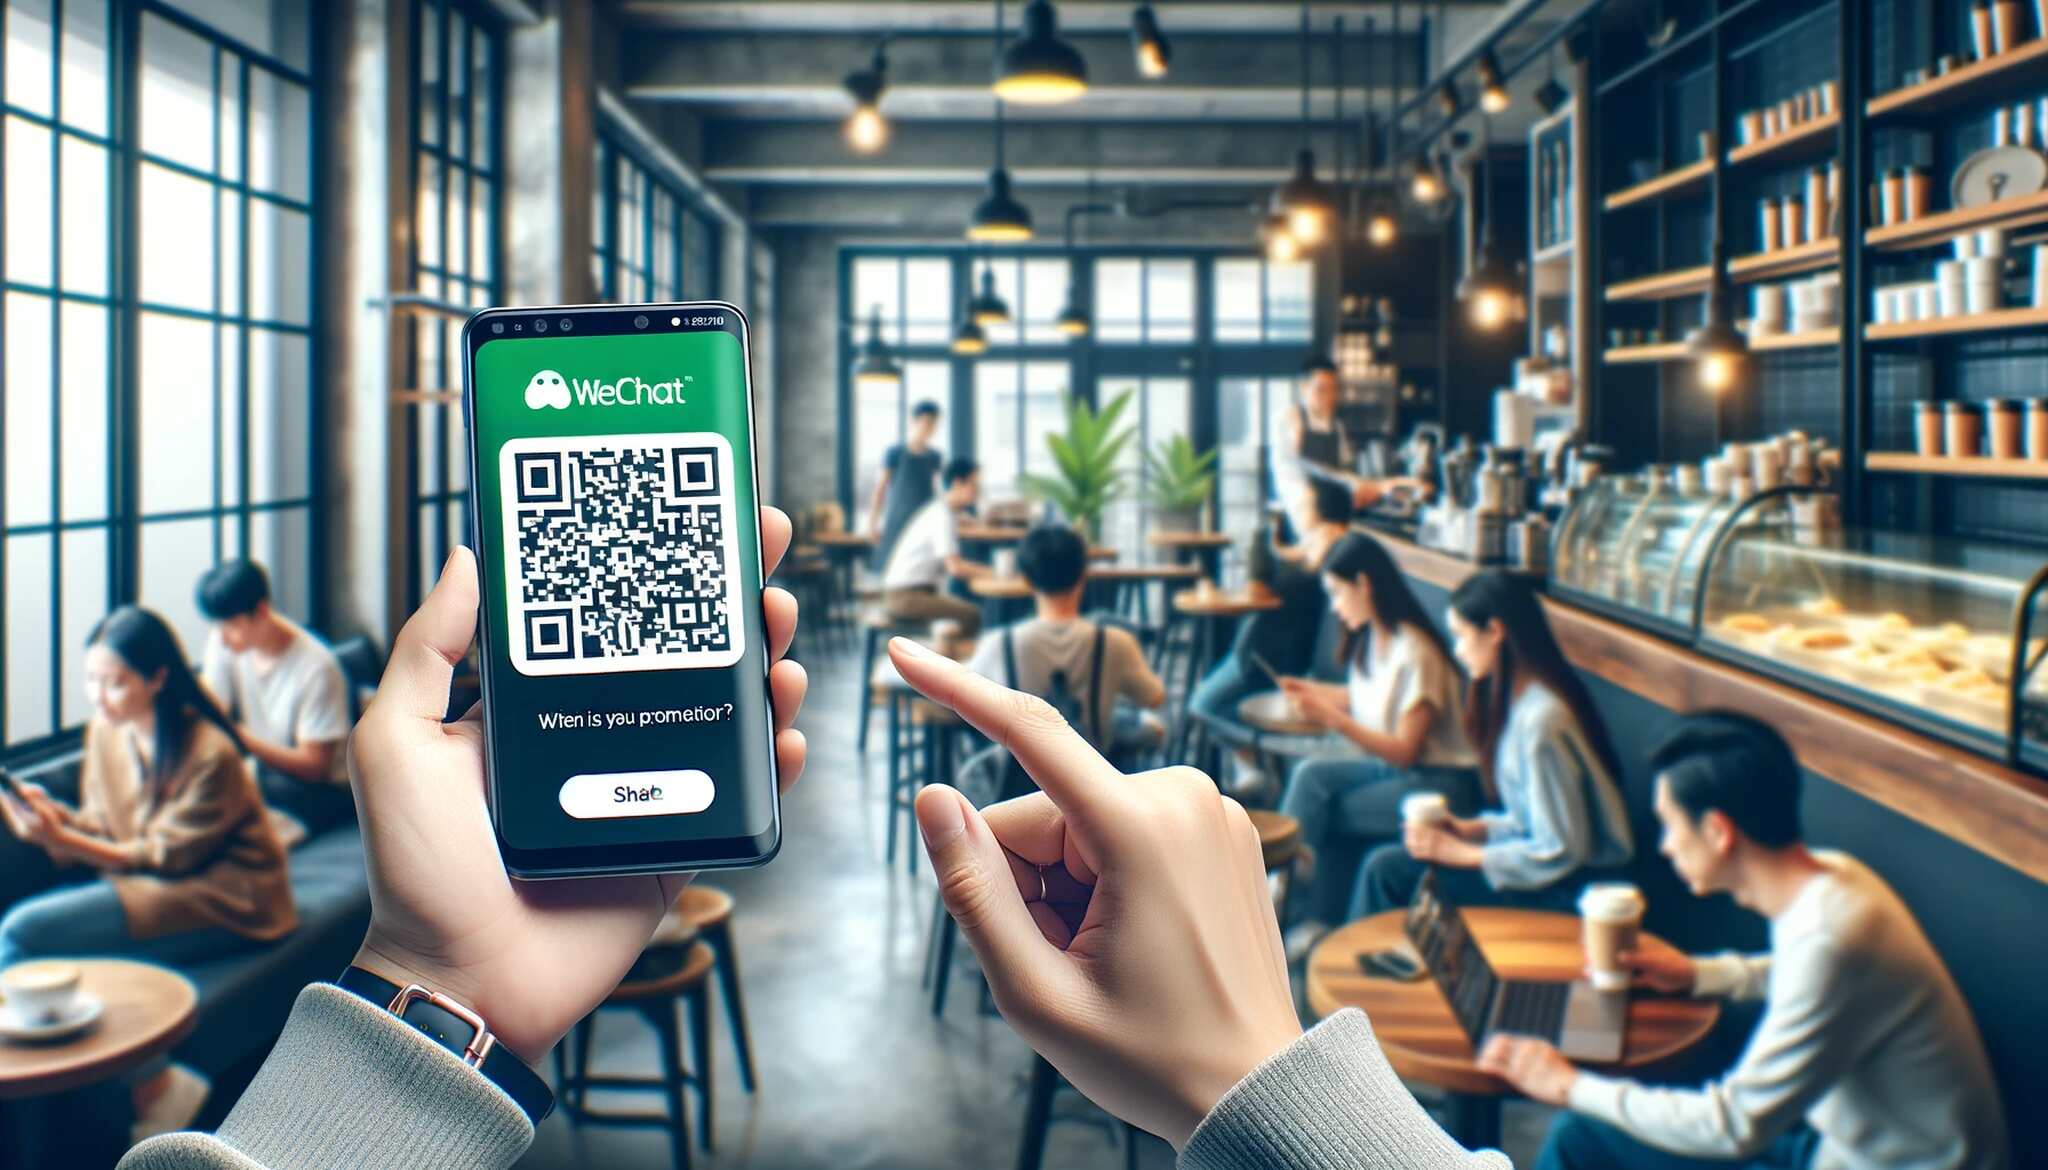  A person scanning a WeChat QR code with their smartphone at a coffee shop 